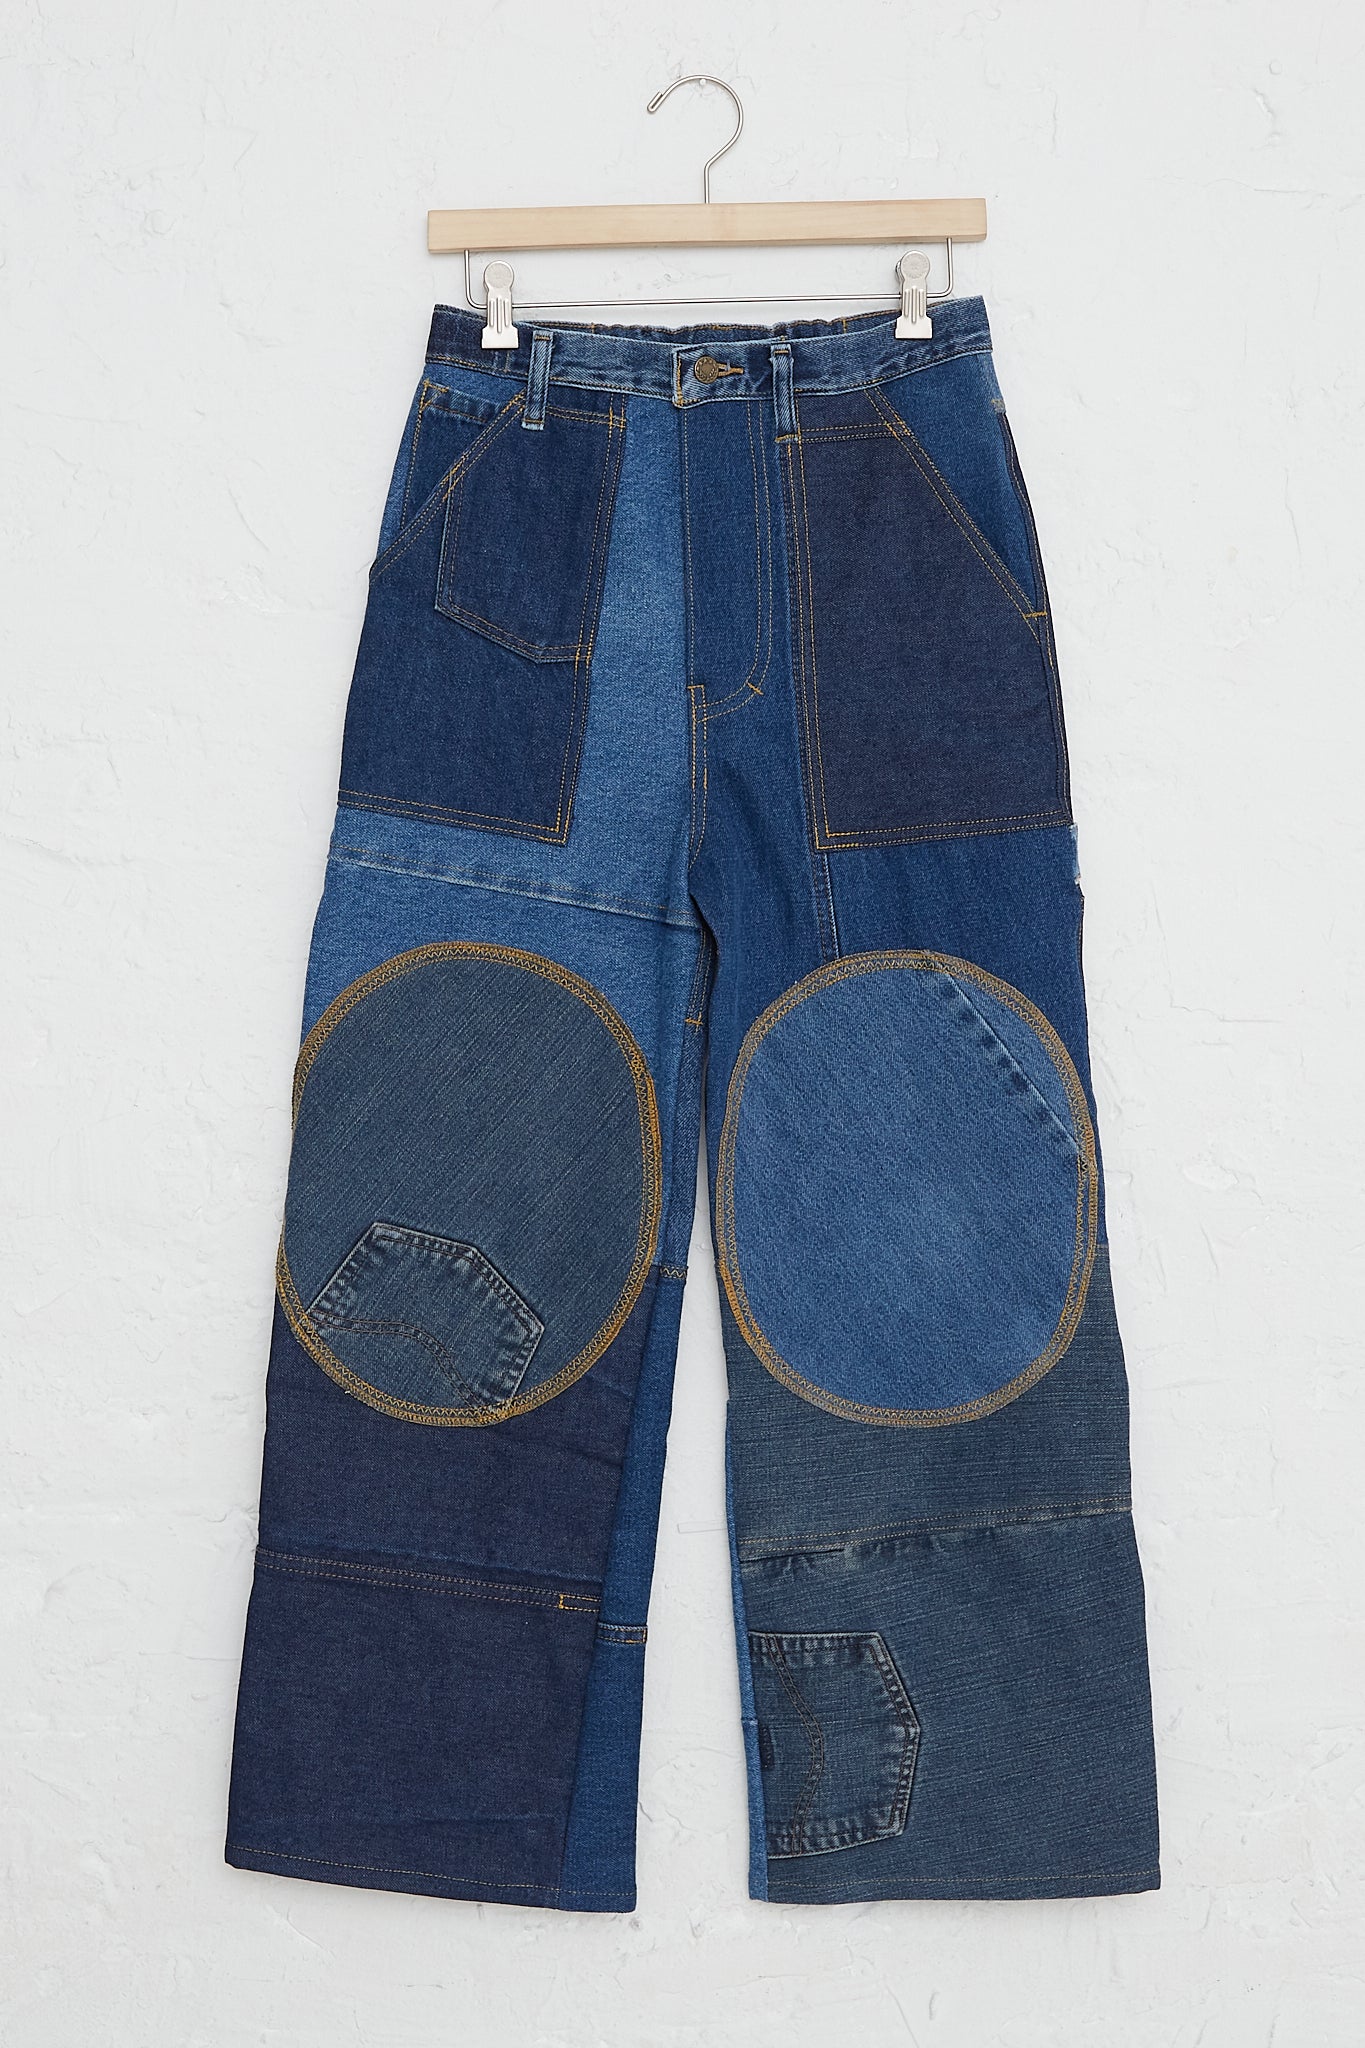 WildRootz - Reworked Jeans in Blue Variation B  - S front view